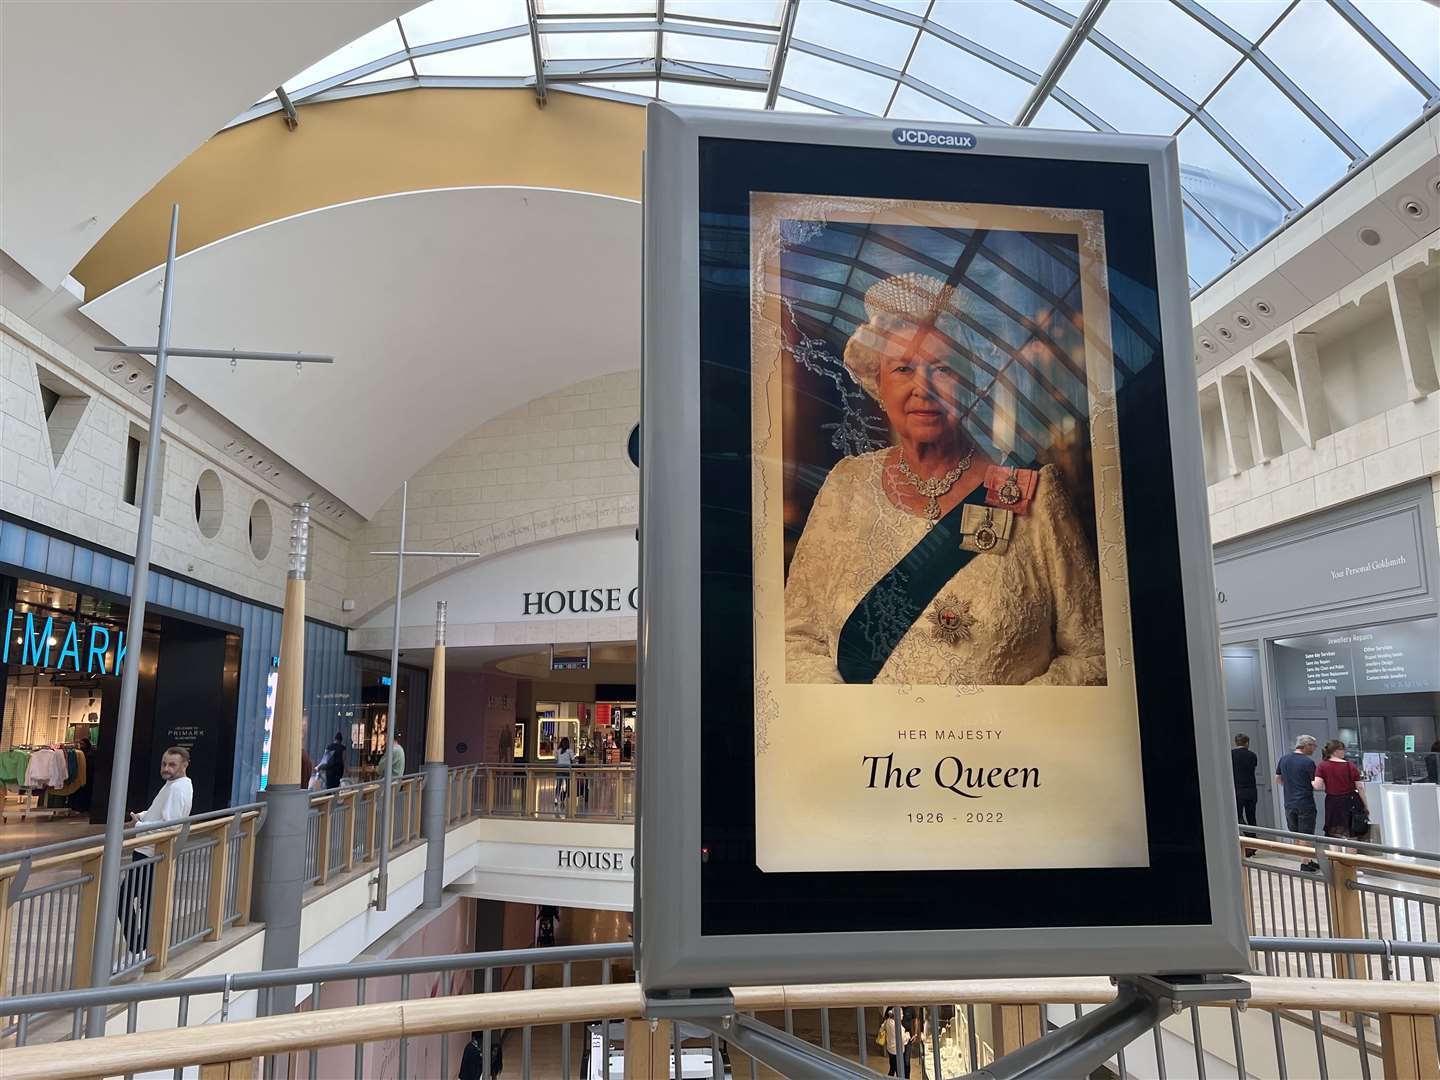 Tributes to Her Majesty Queen Elizabeth II at Bluewater Shopping Centre, in Dartford